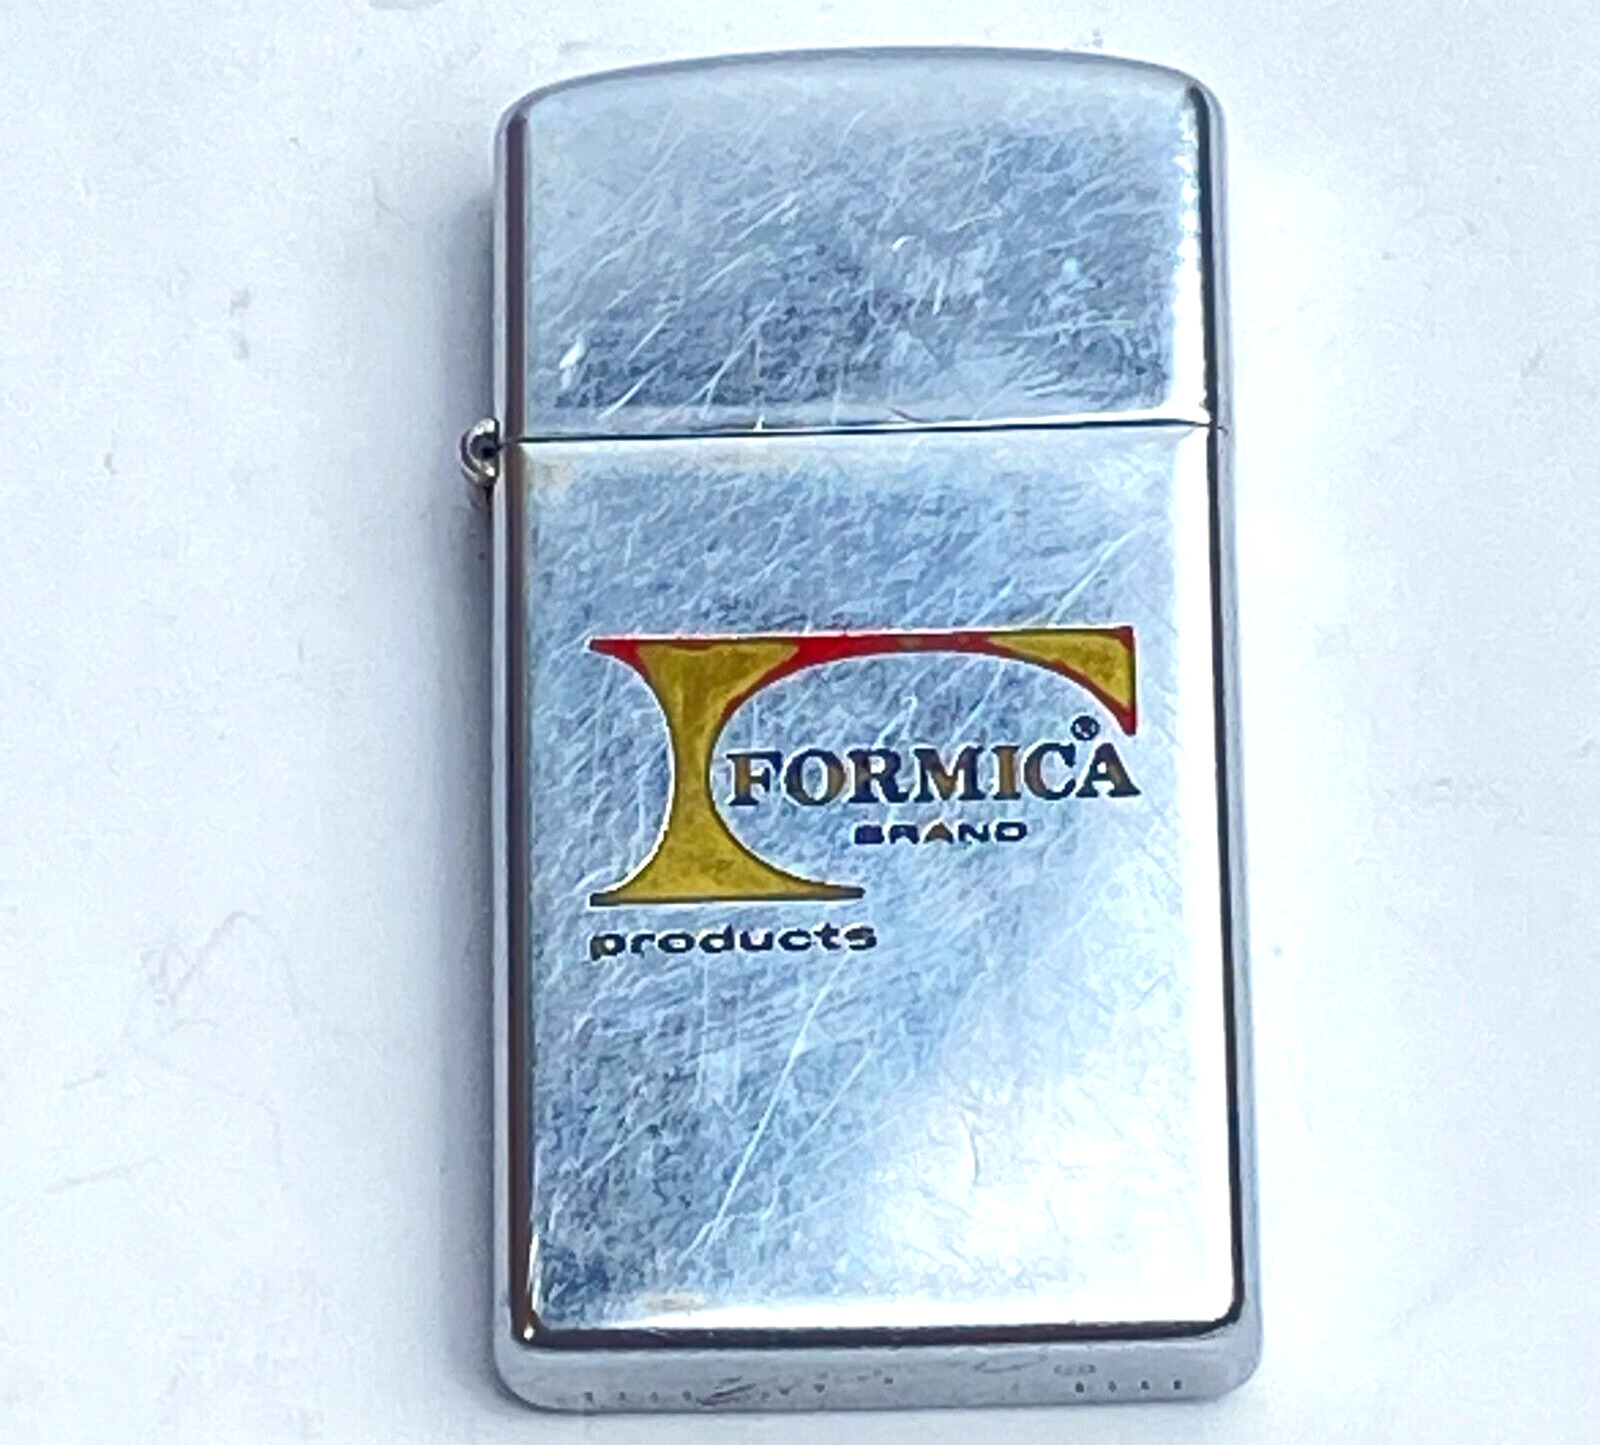 1966 Vintage Zippo Slim Lighter Advertising Formica ® Brand Products